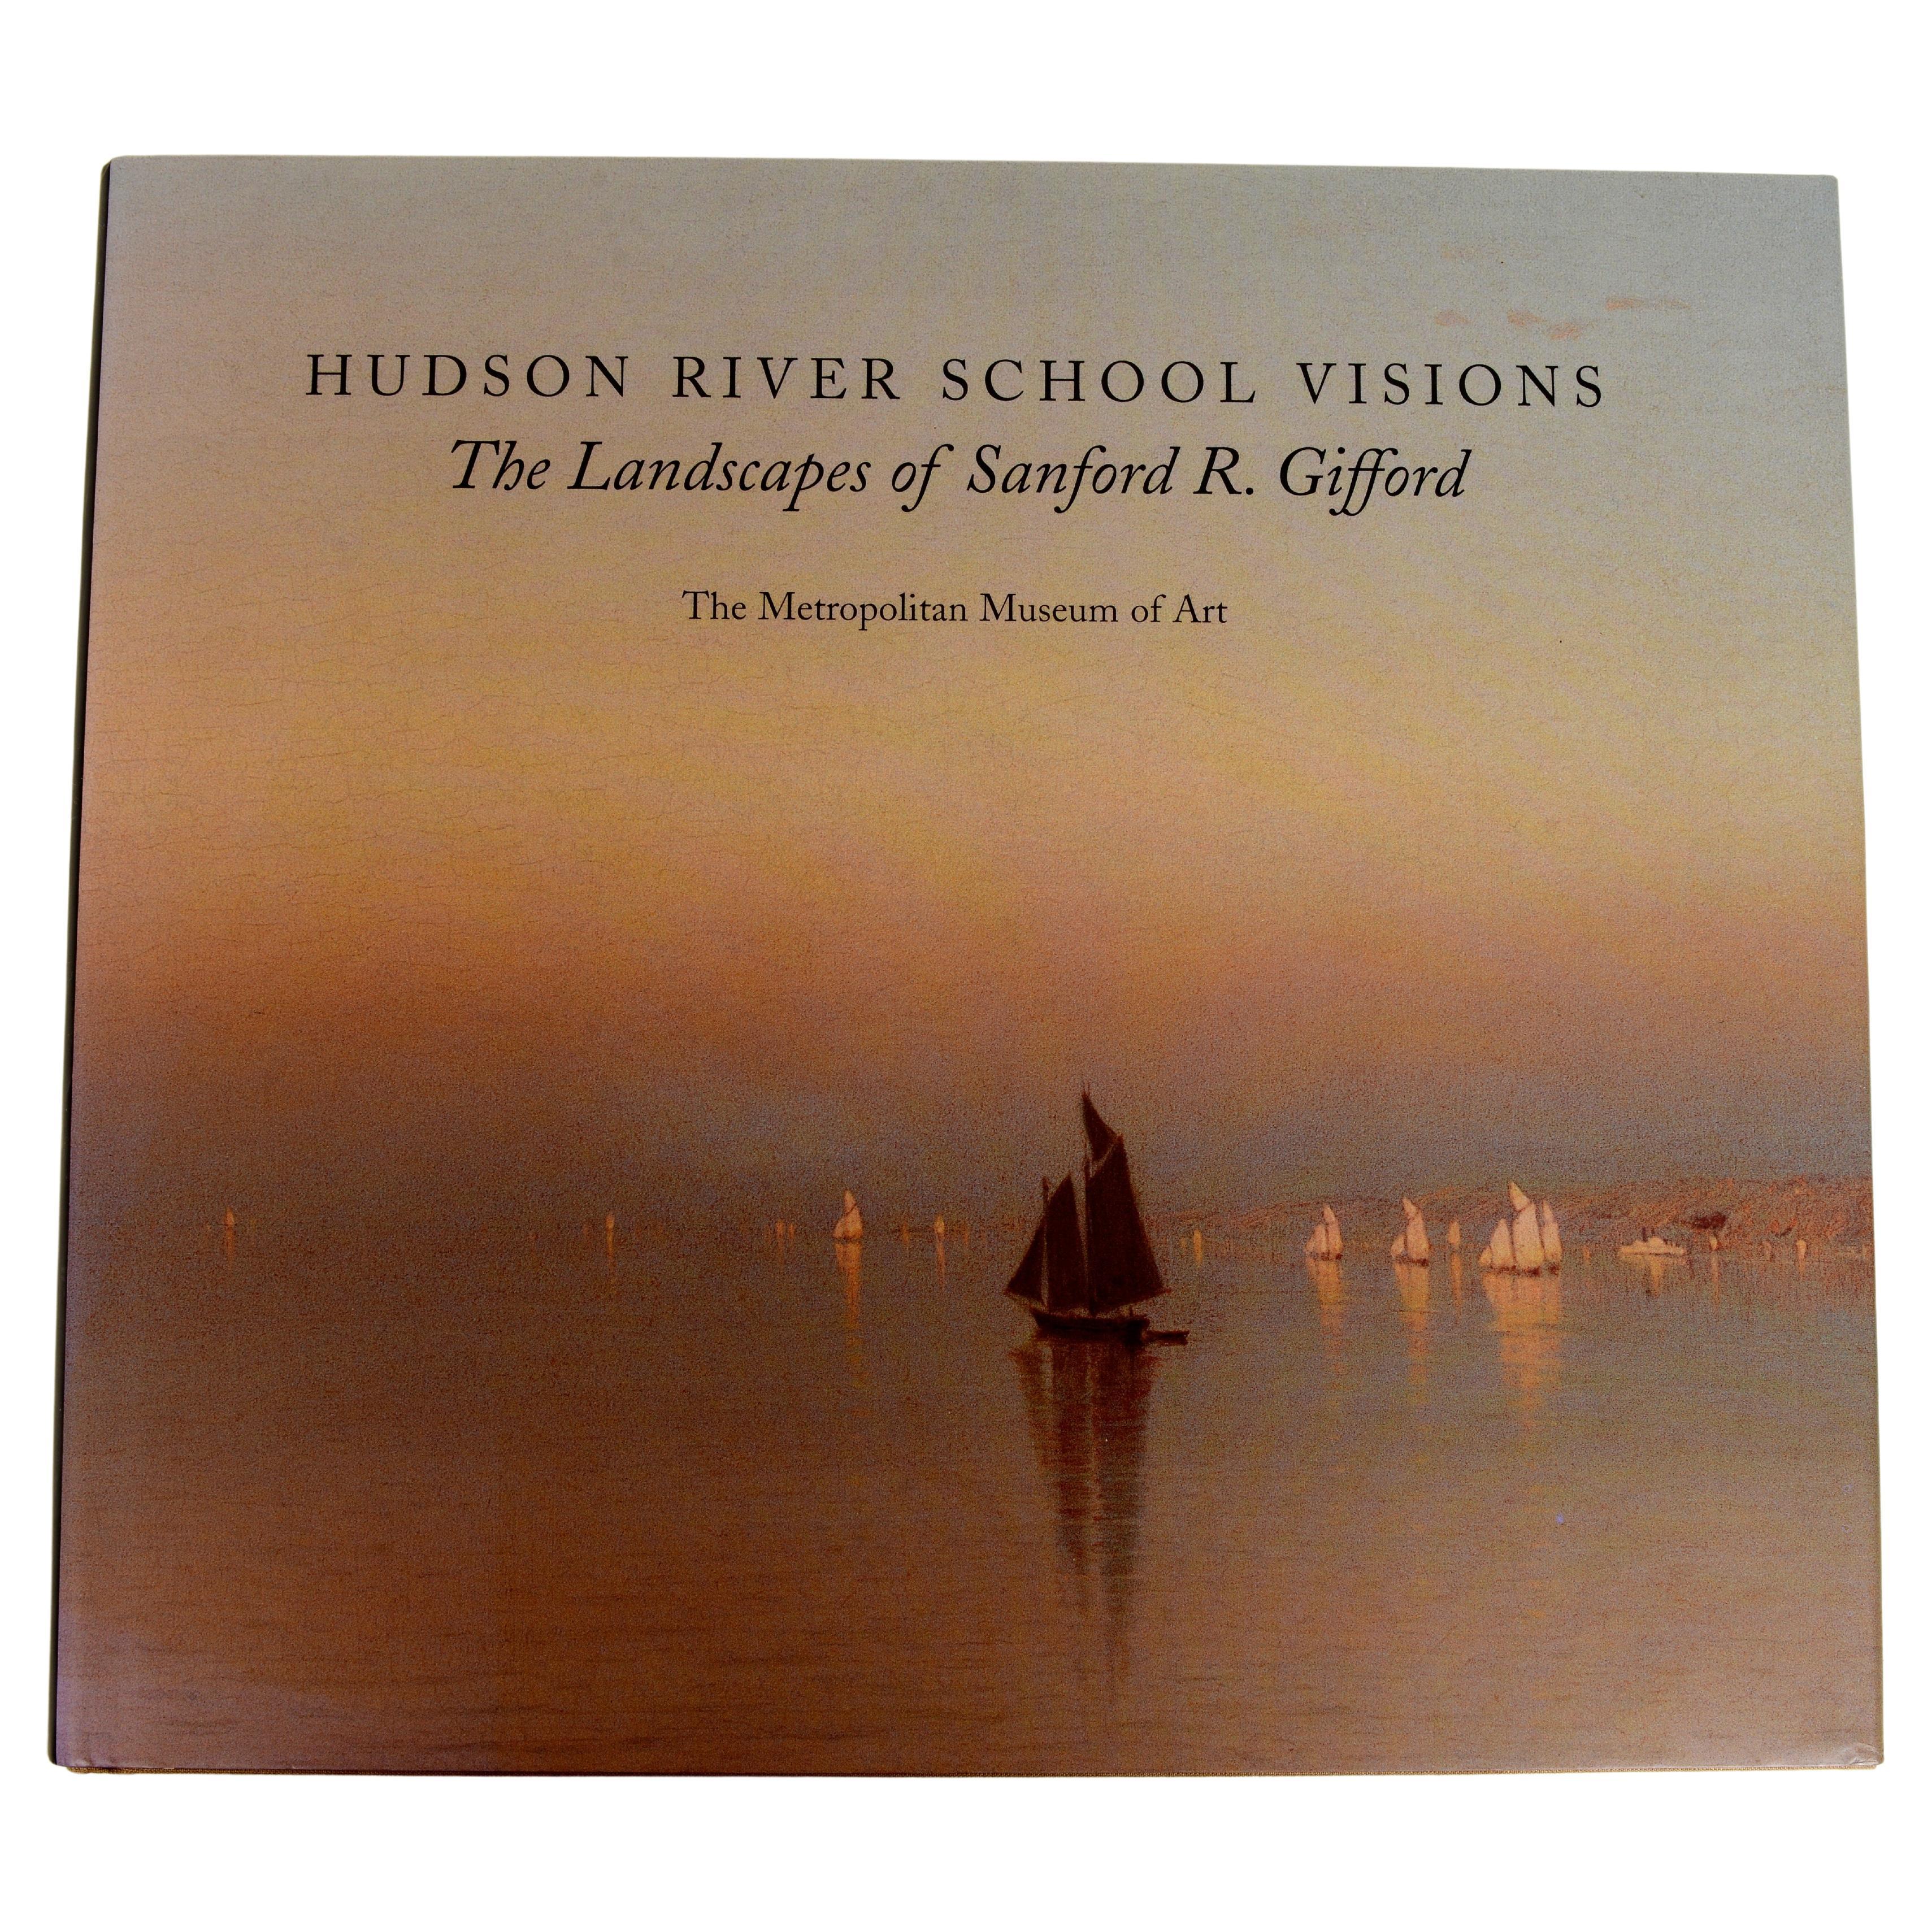 Hudson River School Visions The Landscapes of Sanford R. Gifford by Kevin Avery